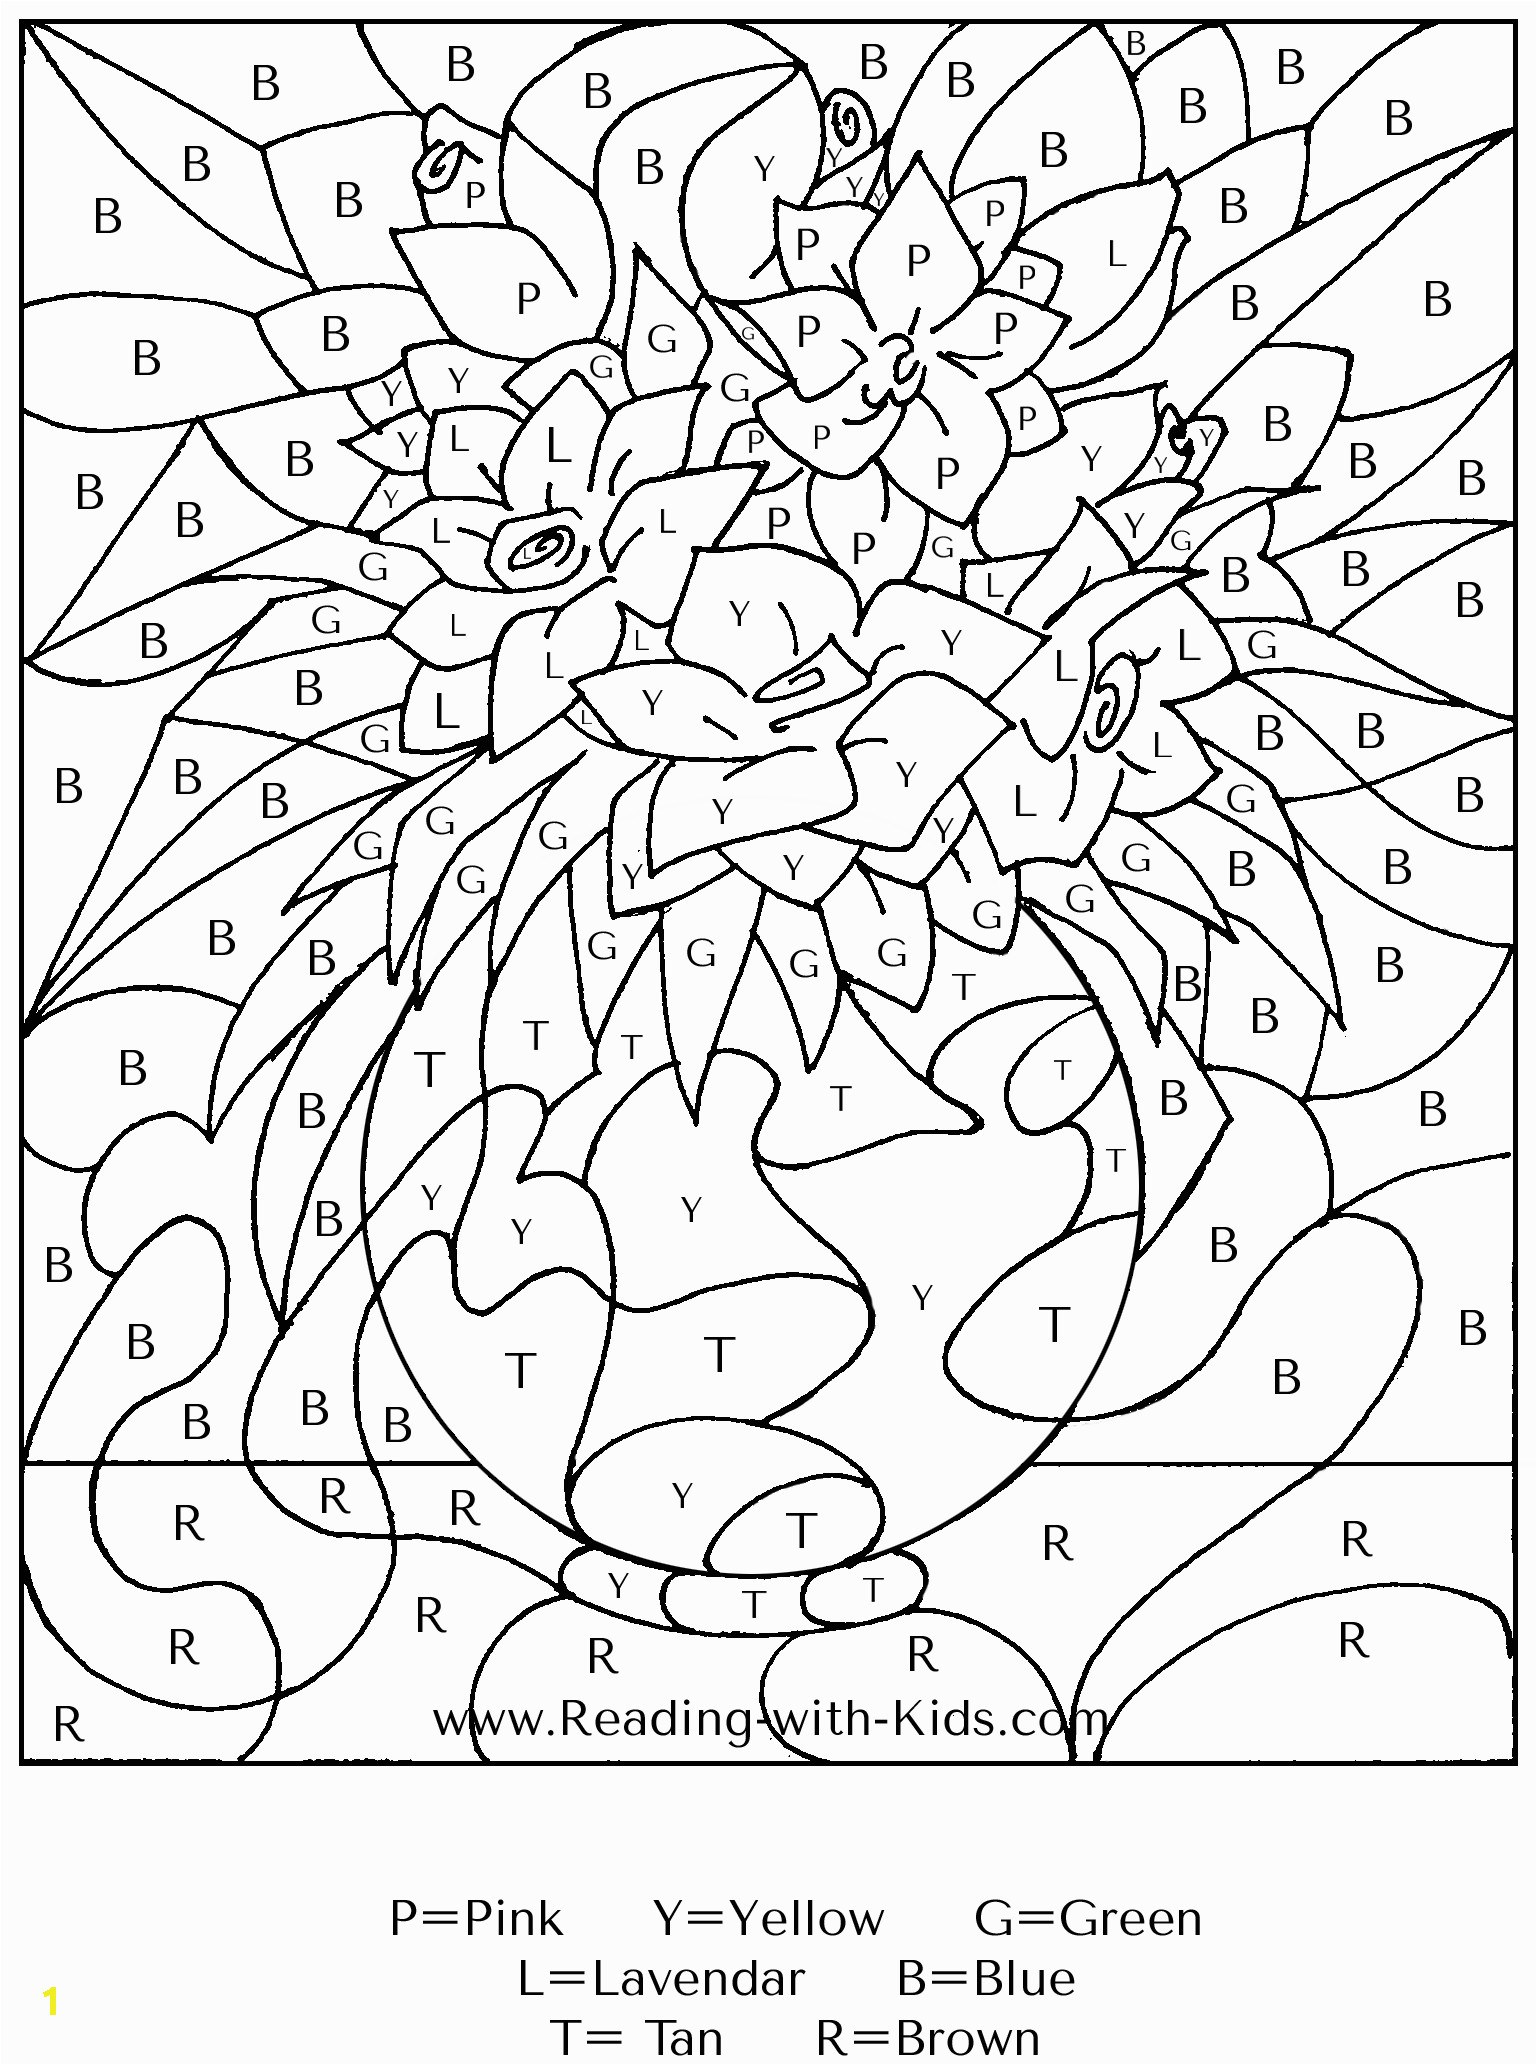 Free Color by Number Coloring Pages for Adults Printable Color by Number Coloring Pages for Adults at